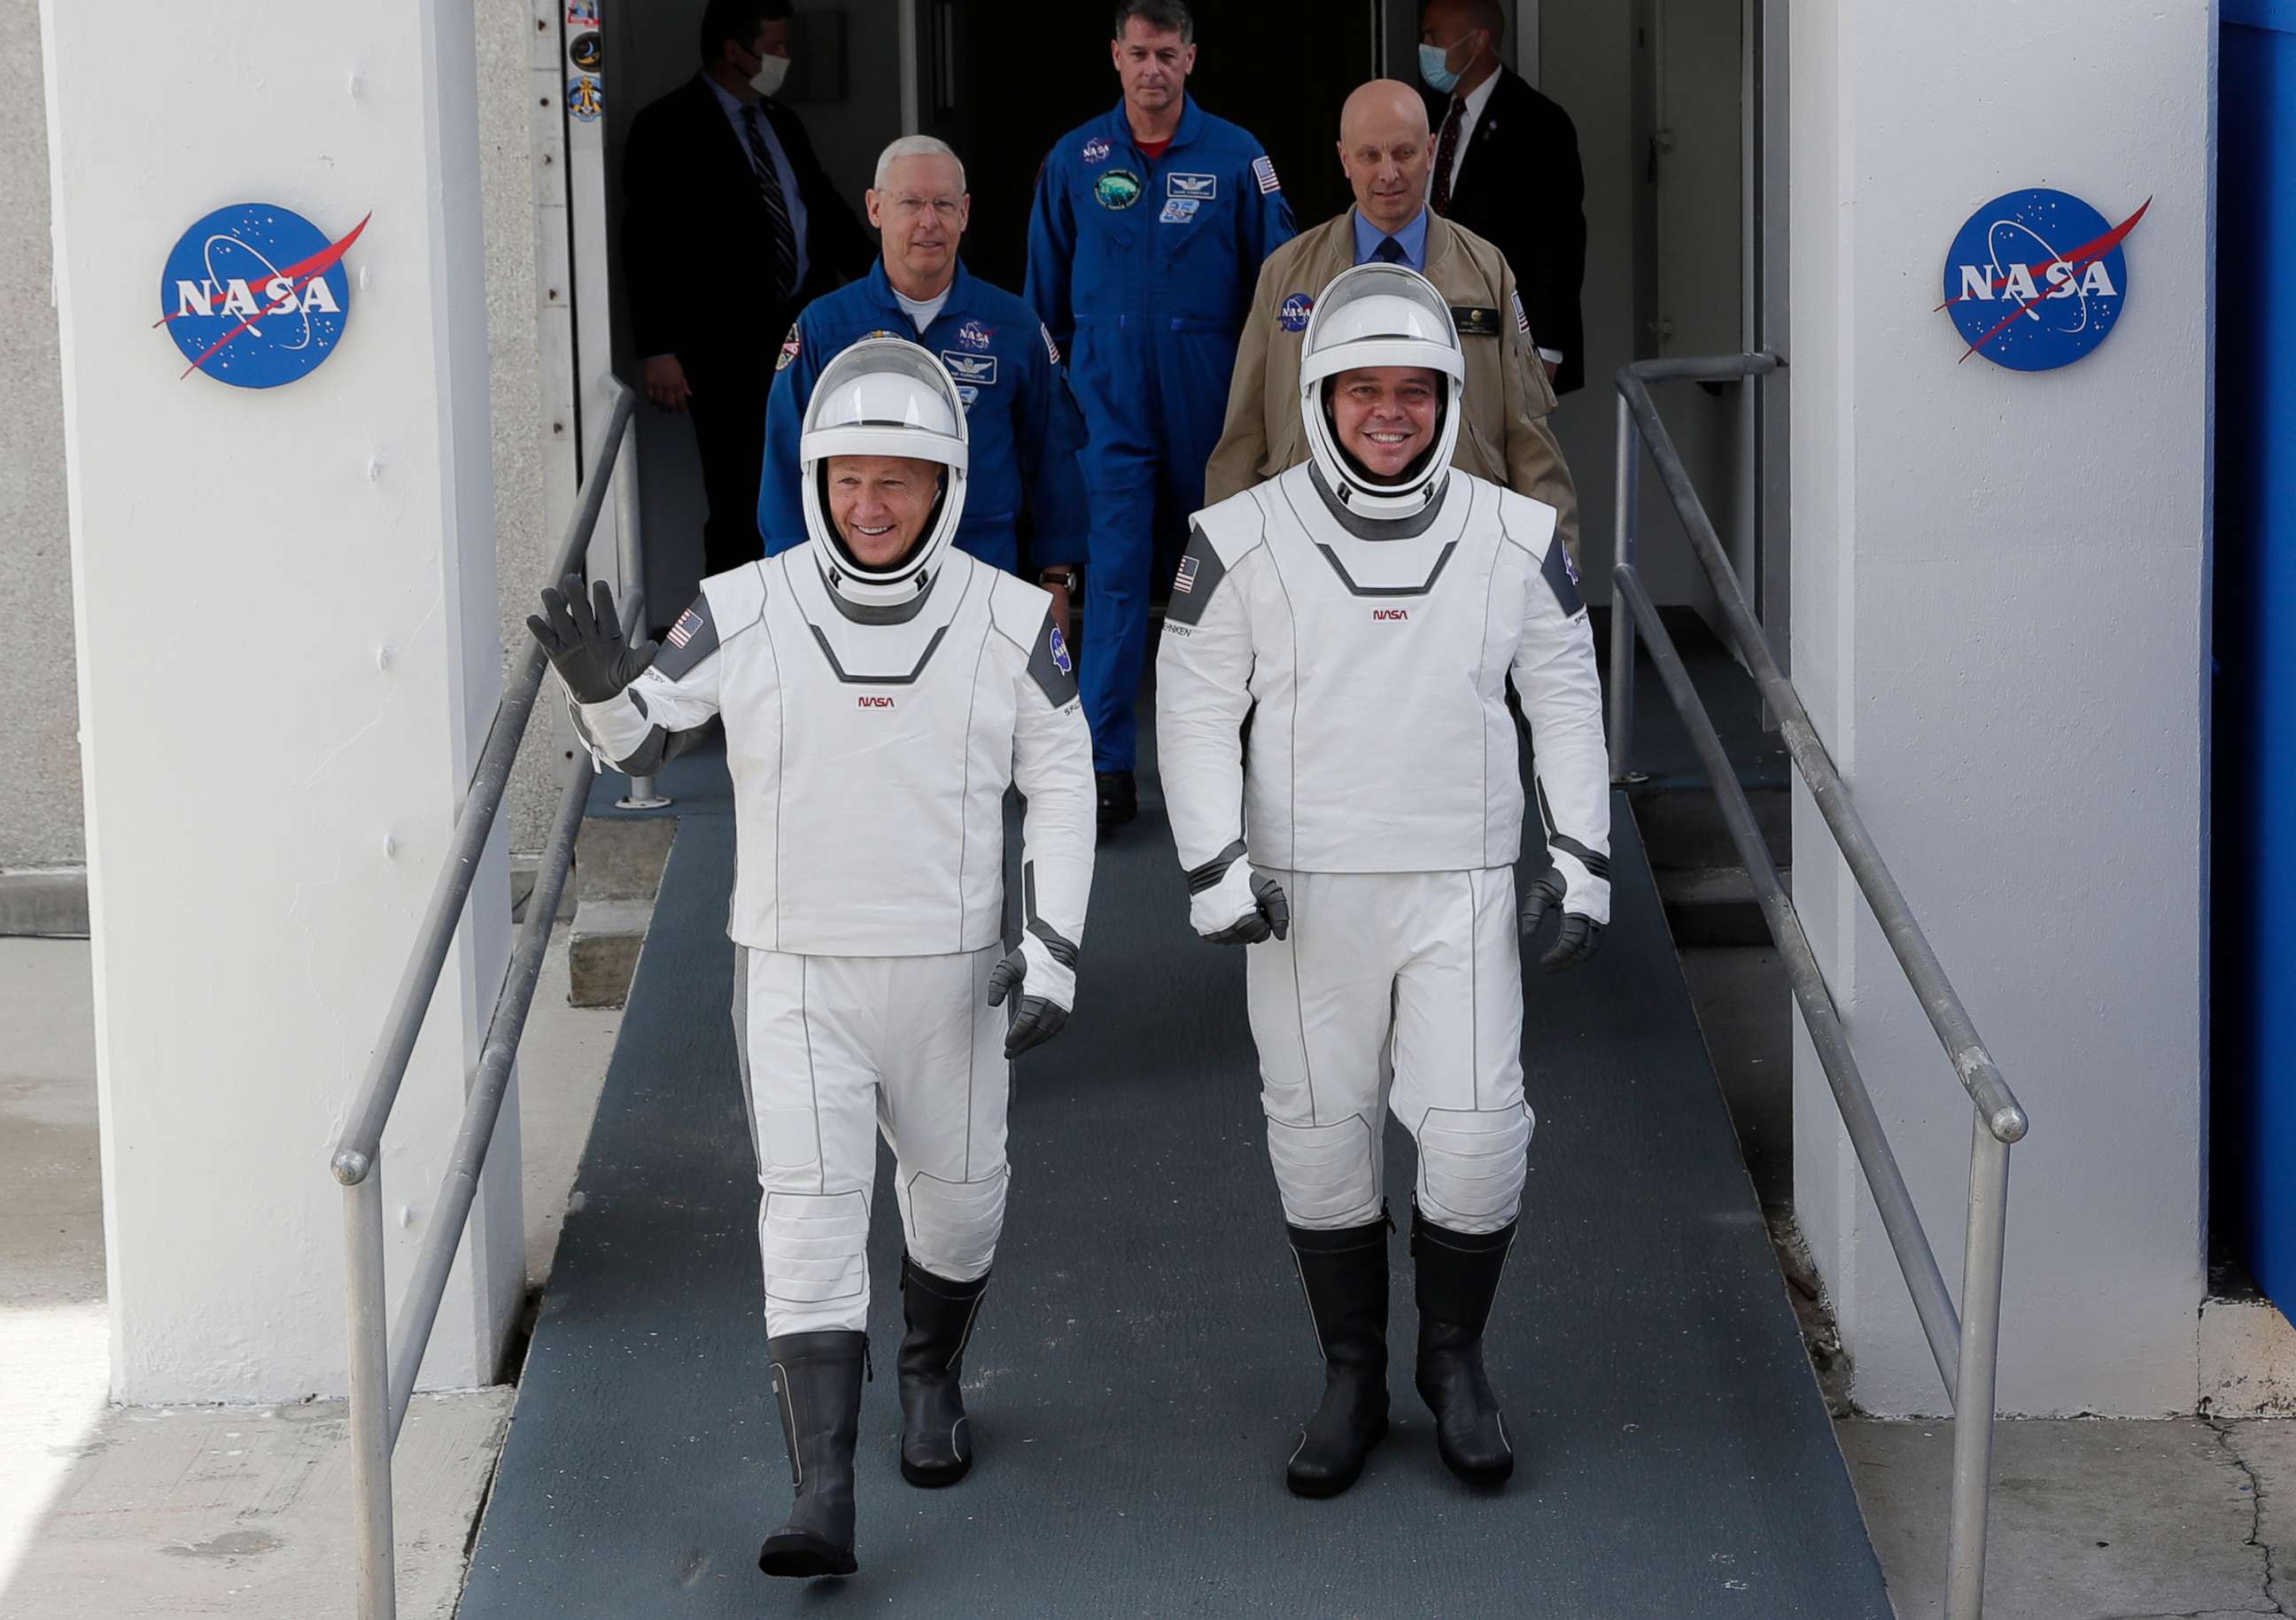 PHOTO: NASA astronauts Douglas Hurley, left, and Robert Behnken wave as they walk out of the Neil A. Armstrong Operations and Checkout Building on their way to Pad 39-A, at the Kennedy Space Center in Cape Canaveral, Fla., May 27, 2020.